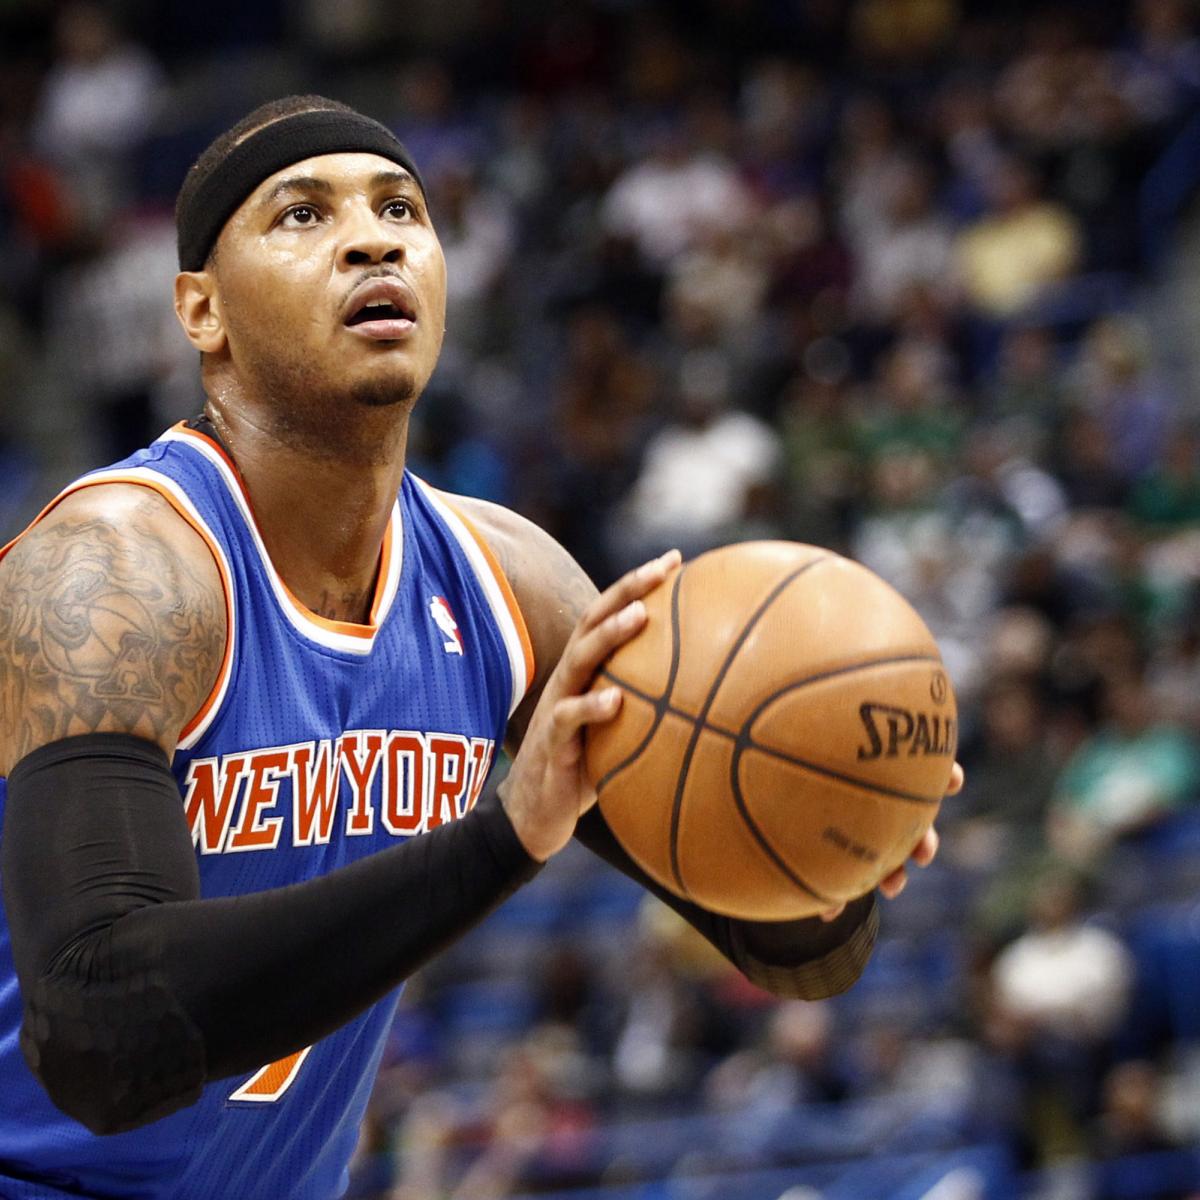 The New York Knicks' 5 Biggest Questions Heading into the Regular